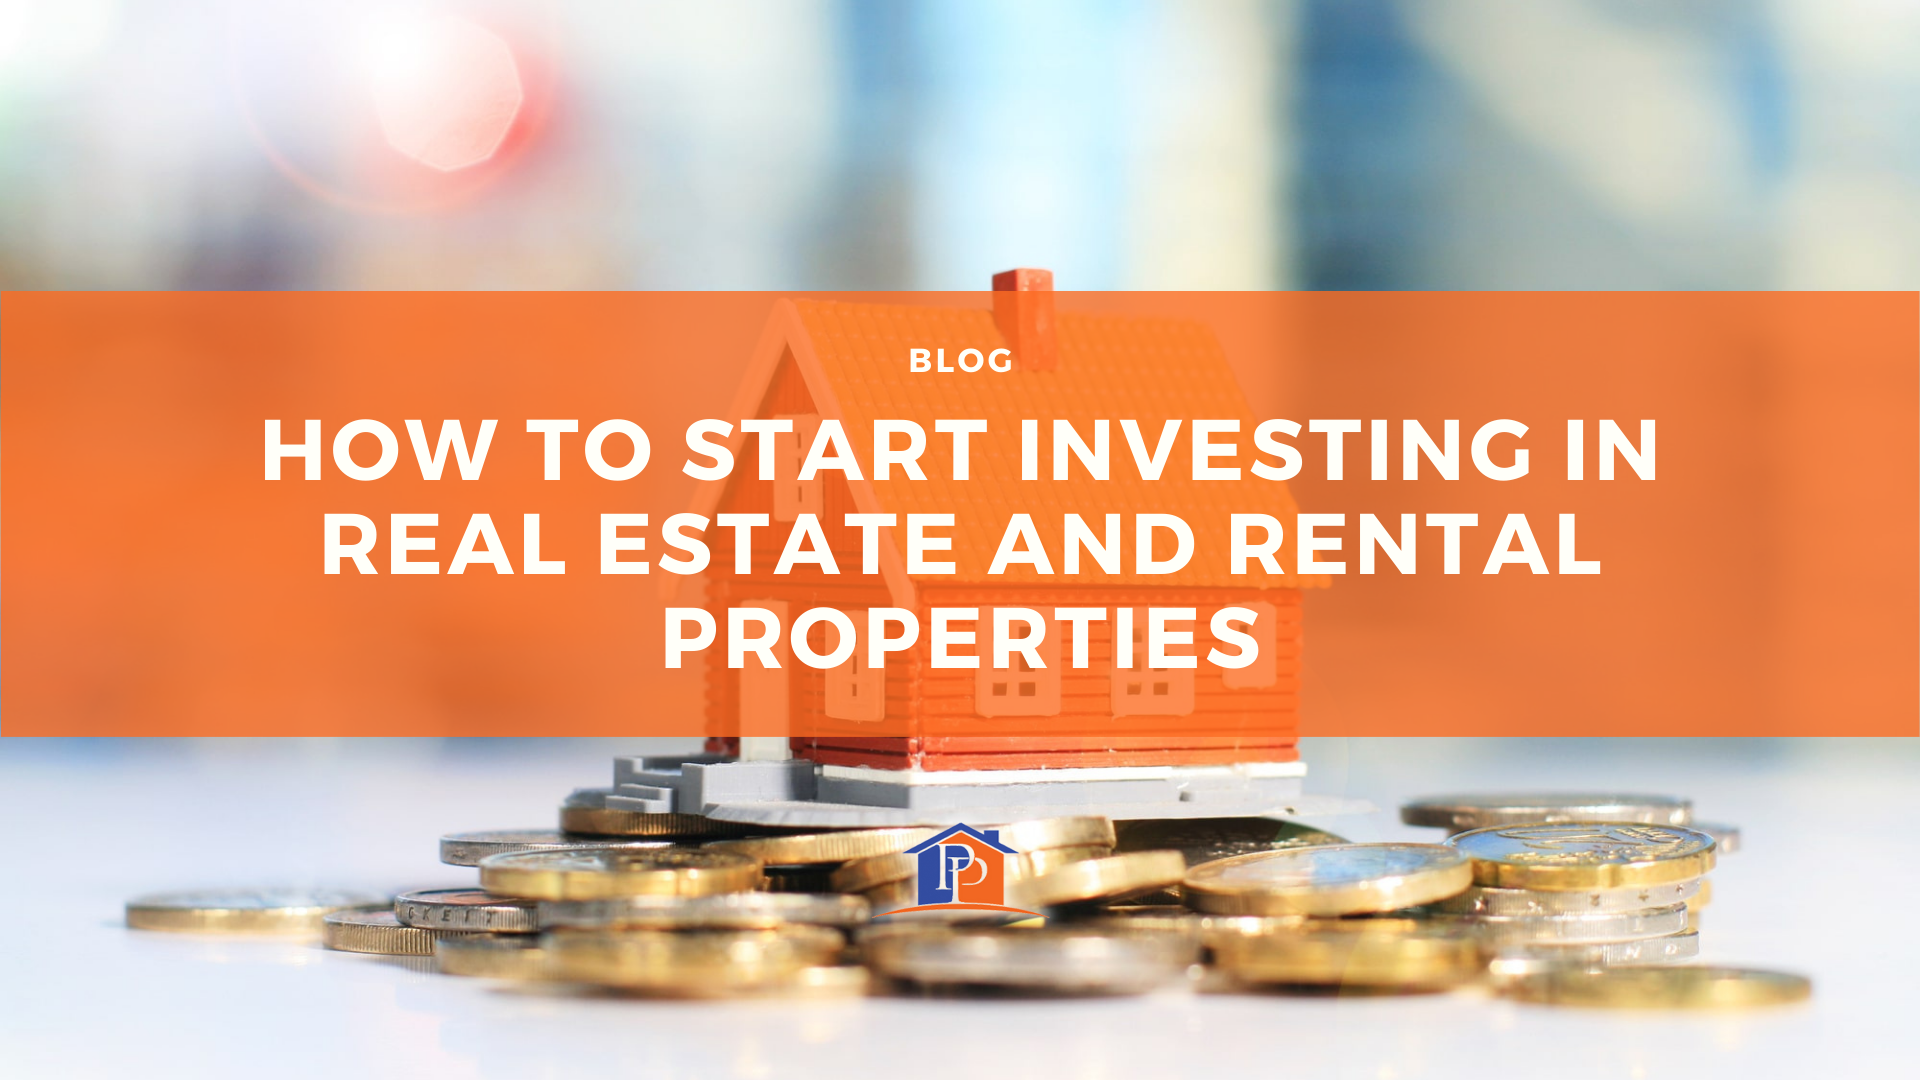 How to Start Investing in Real Estate and Rental Properties